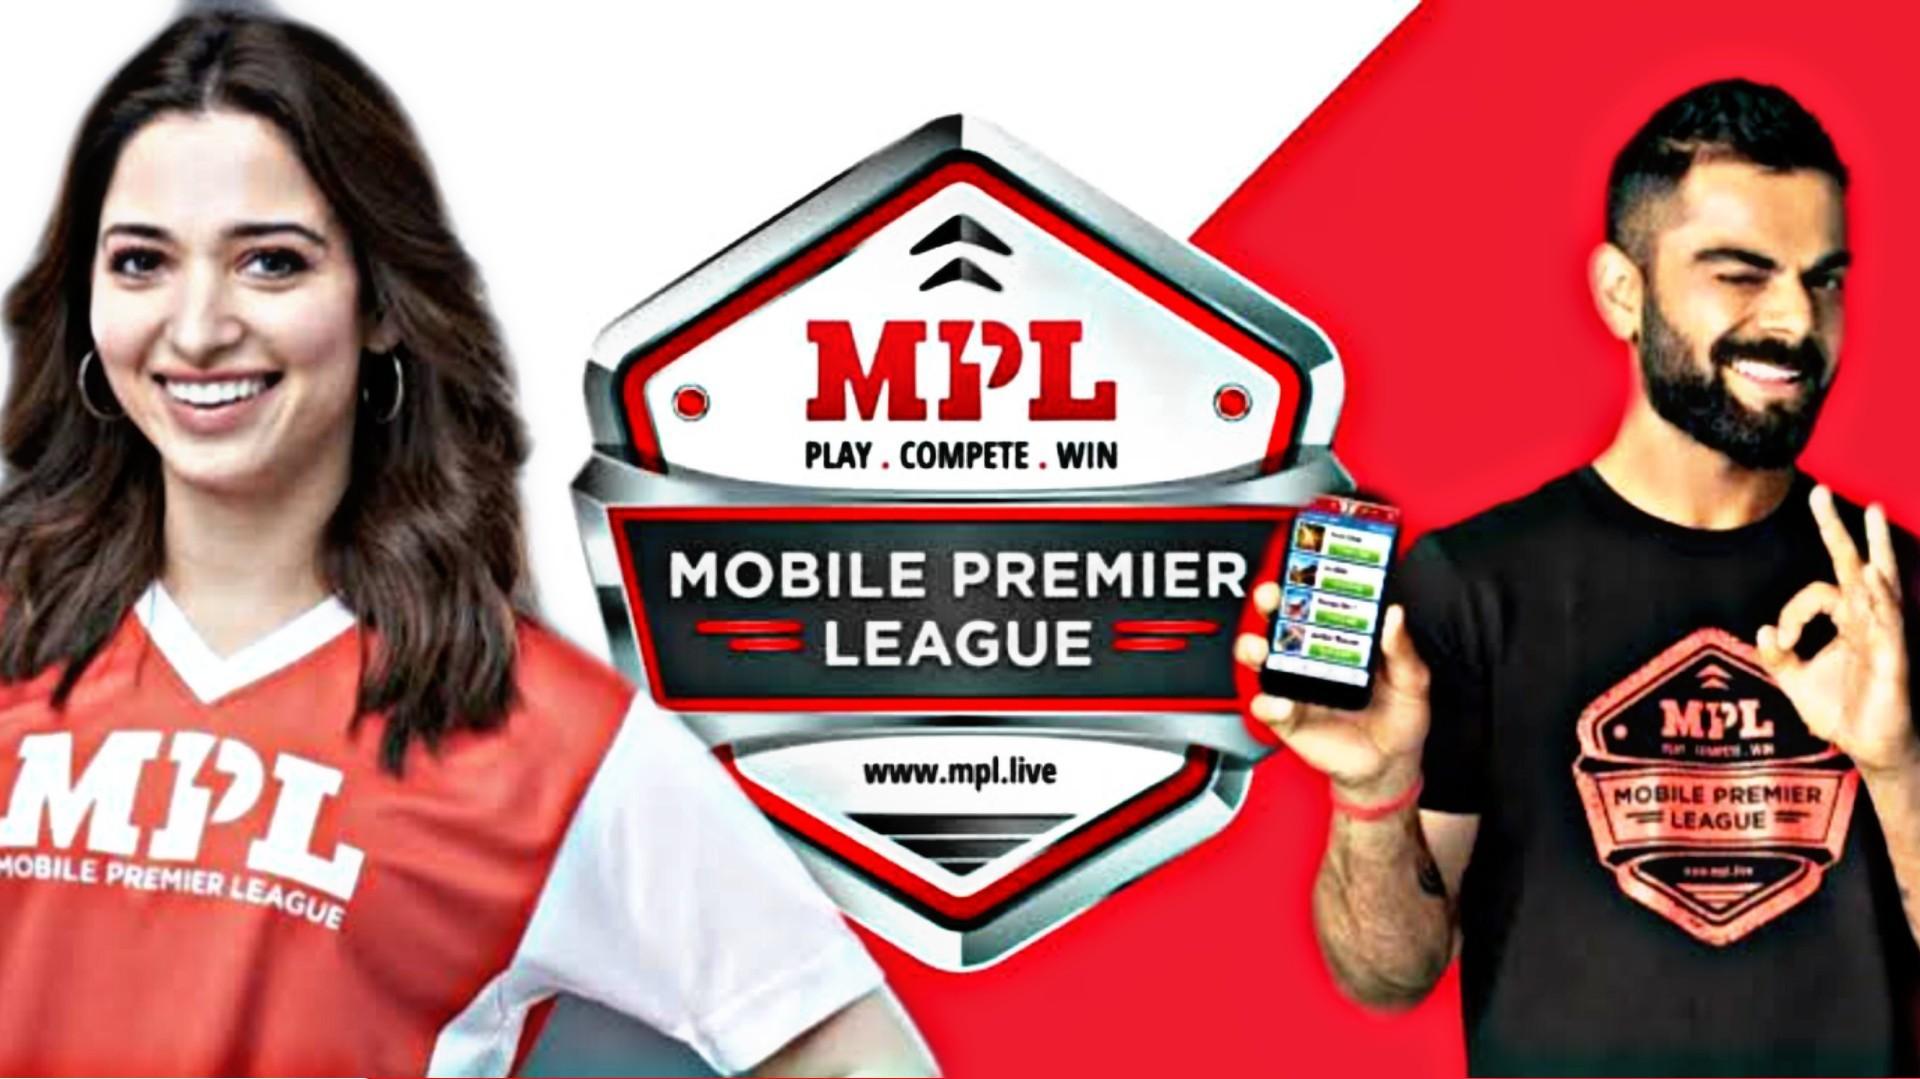 Guide For Mpl Earn Money Mpl Apk Pro And Mpl Game For Android Apk Download